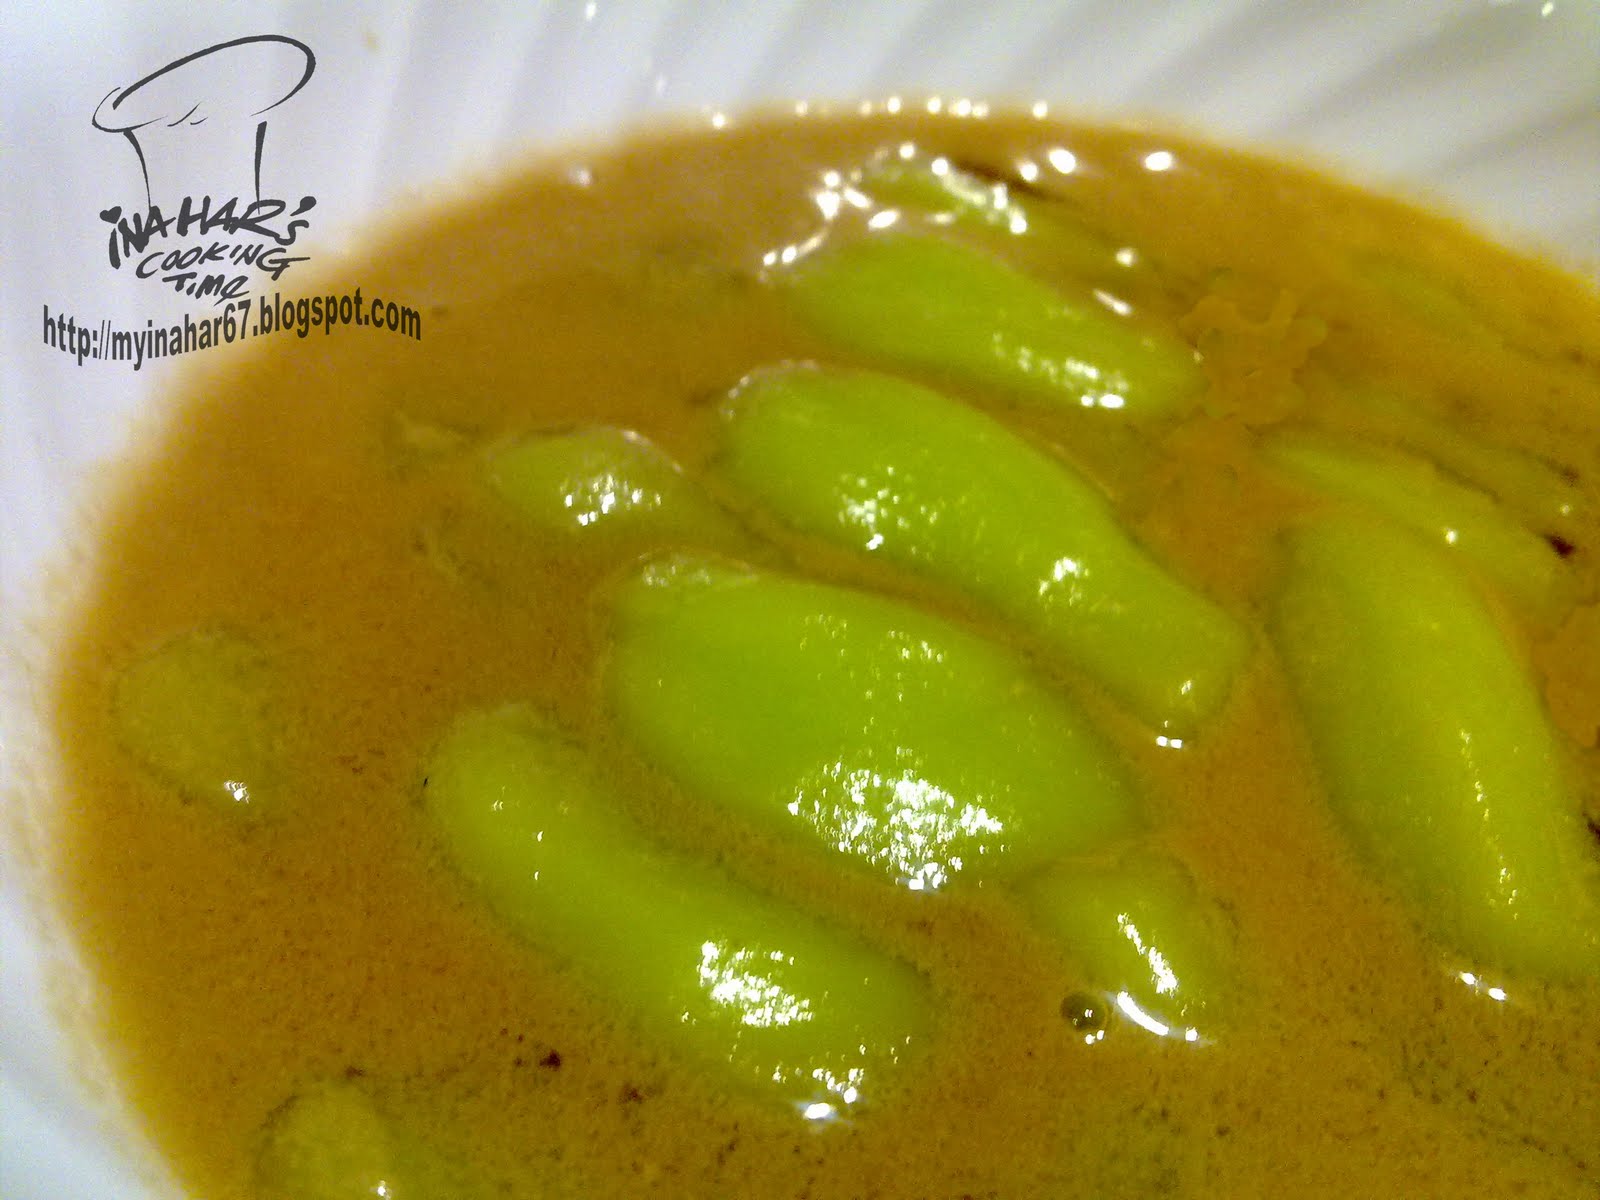 INAHAR'S COOKING TIME!: BUBUR CANDIL